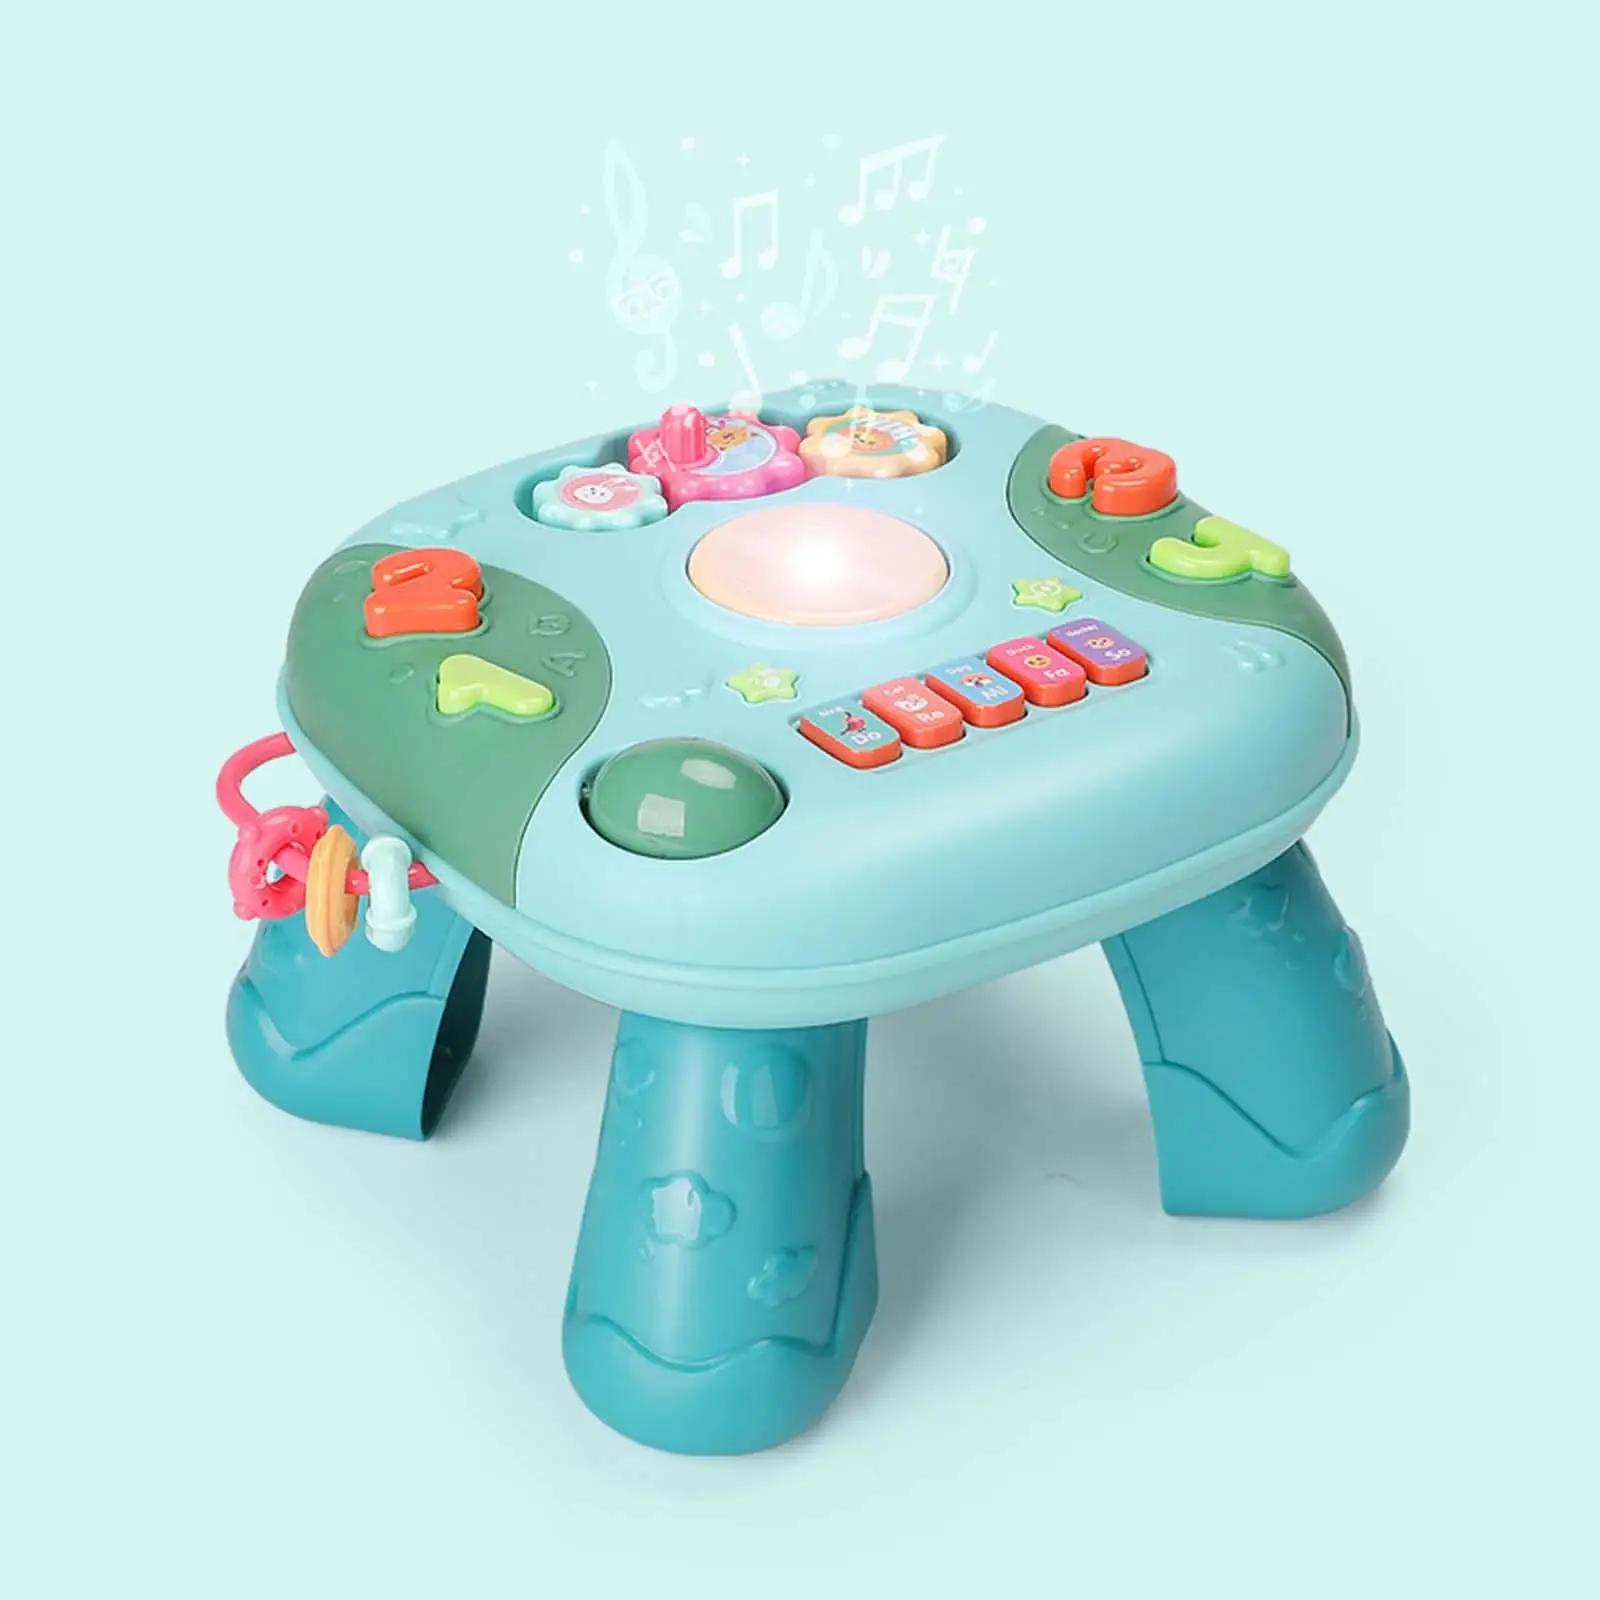 Musical Learning Activity Table Educational Learning Toy for Children Kids